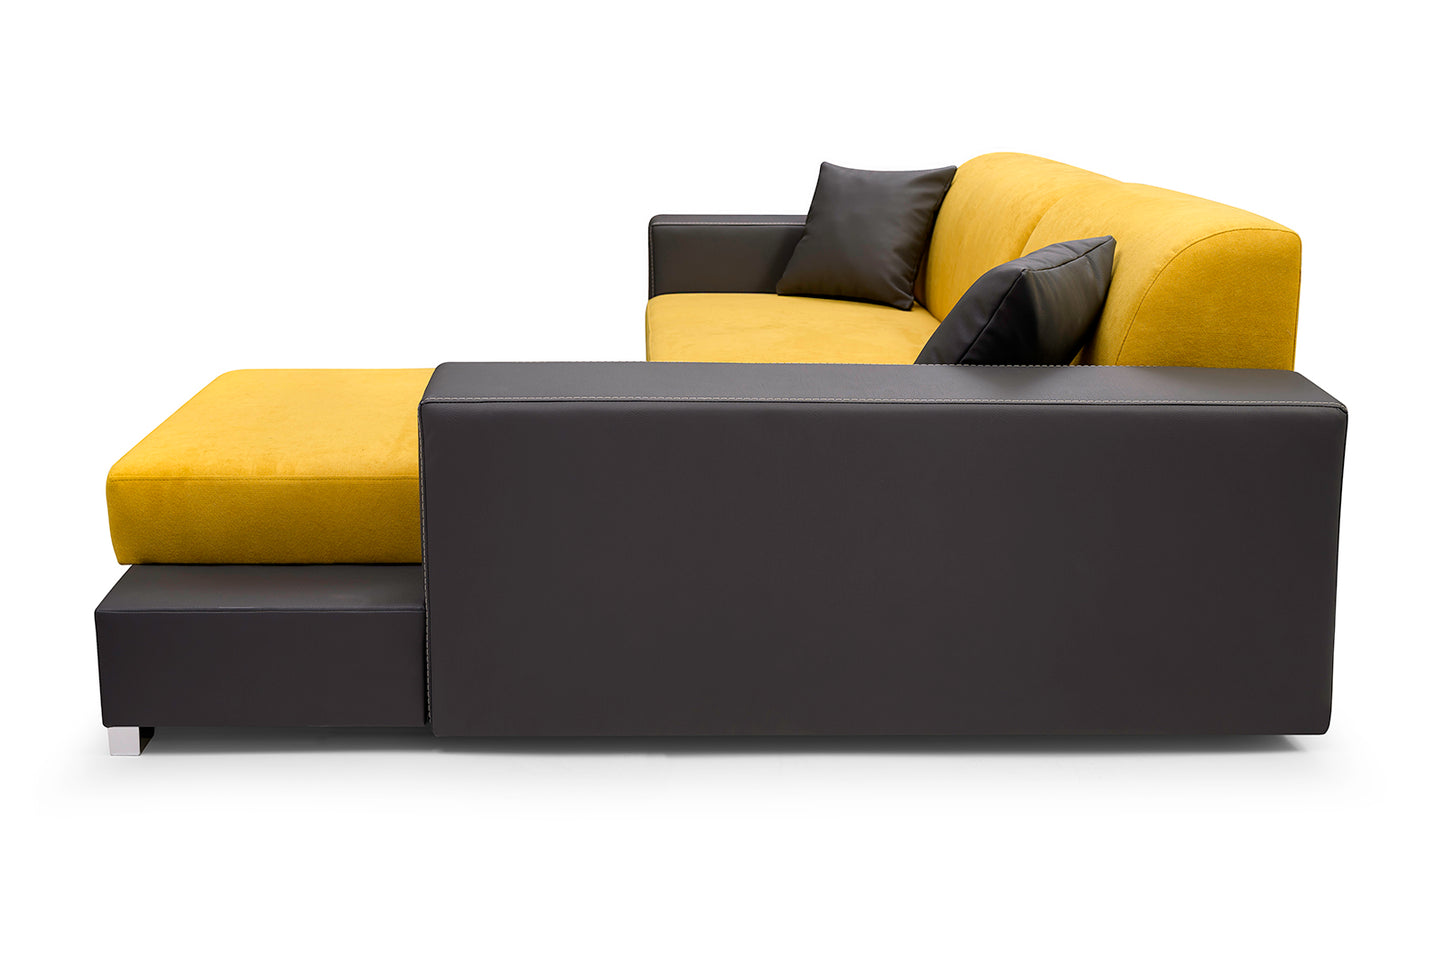 MARINARA - Modern Corner Sofa Bed with Footstool, Storage and Pull Out Bed >290x177cm<